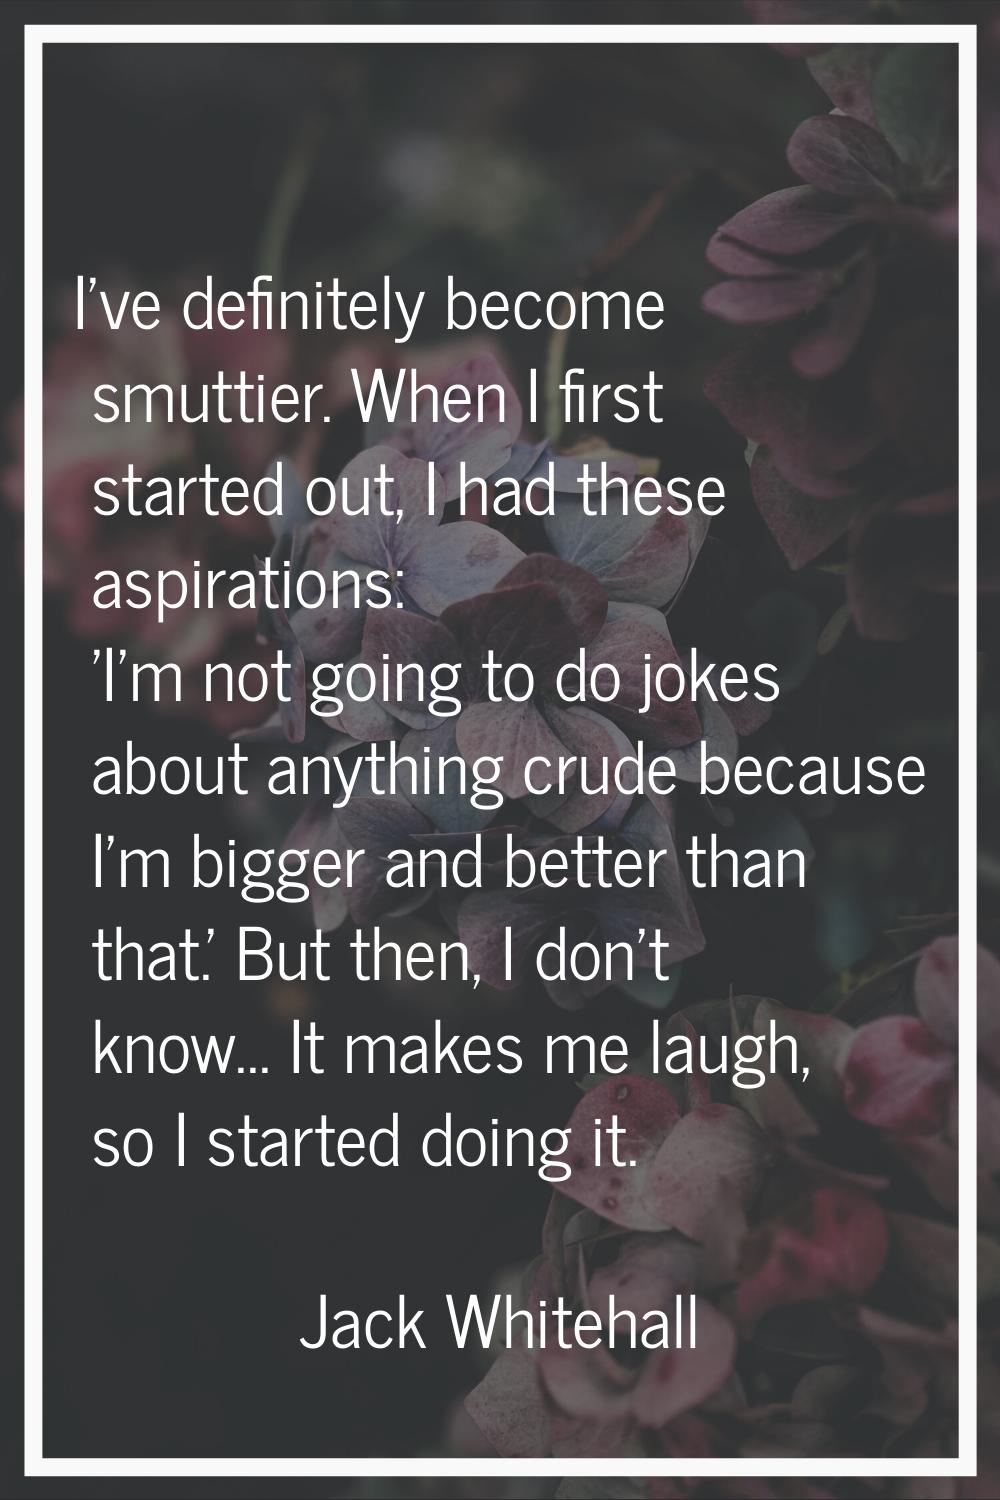 I've definitely become smuttier. When I first started out, I had these aspirations: 'I'm not going 